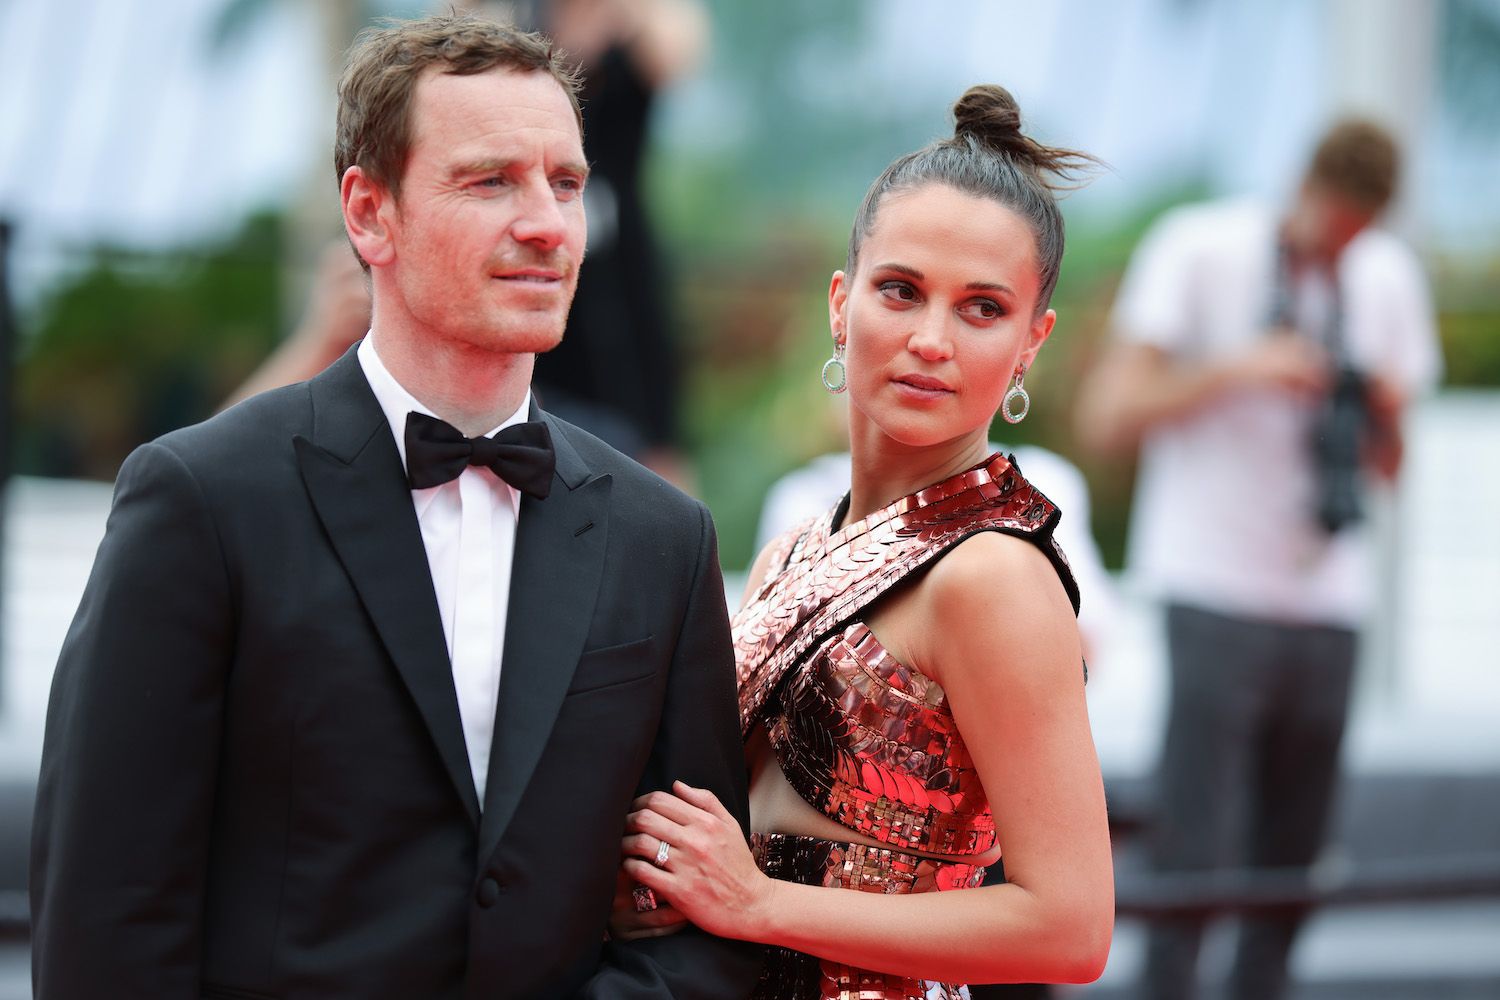 Alicia Vikander confirms she and Michael Fassbender have become parents